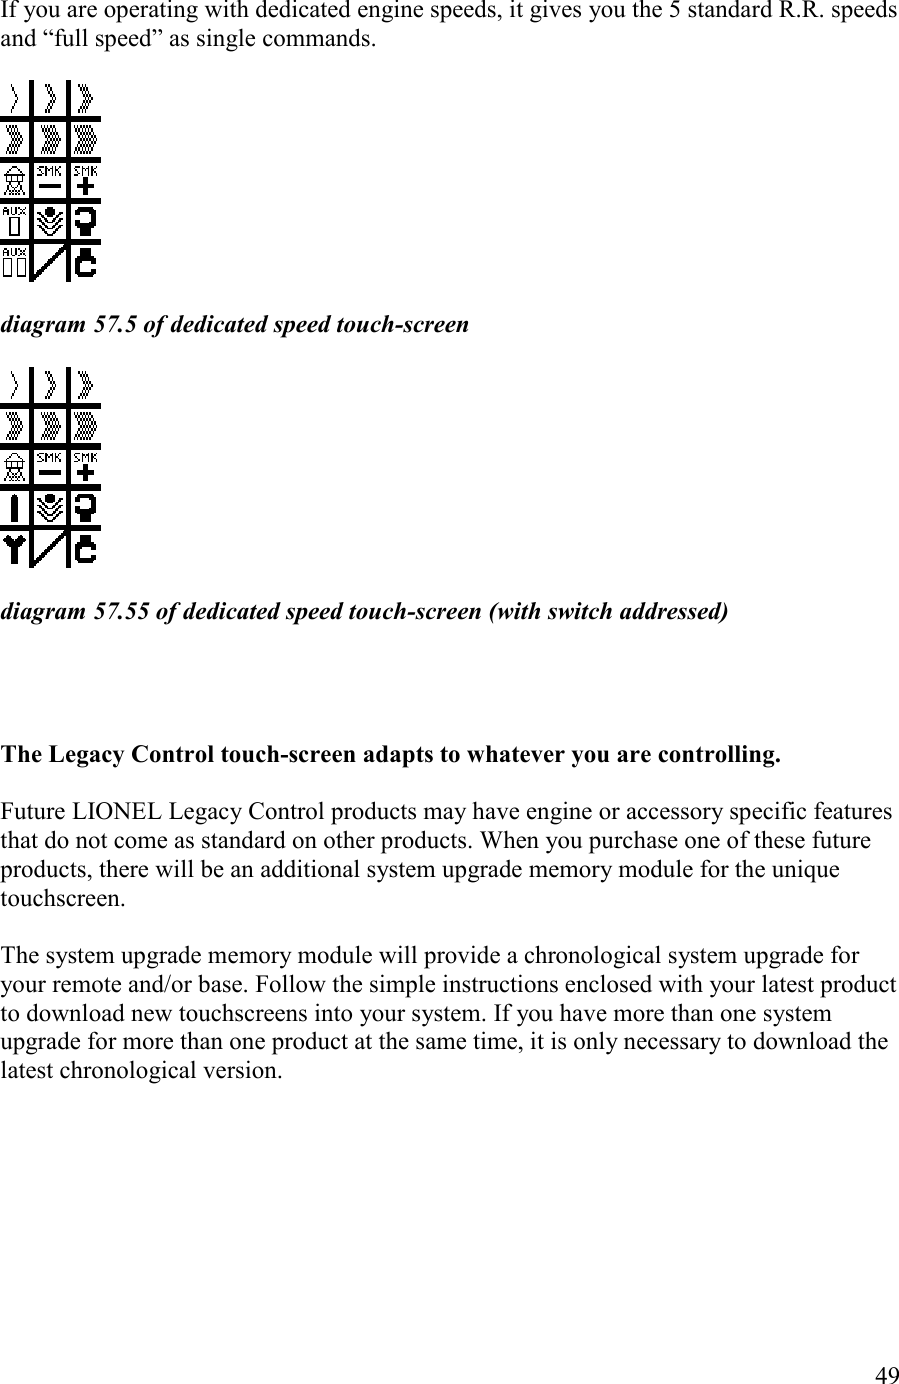   49  If you are operating with dedicated engine speeds, it gives you the 5 standard R.R. speeds and “full speed” as single commands.     diagram 57.5 of dedicated speed touch-screen     diagram 57.55 of dedicated speed touch-screen (with switch addressed)      The Legacy Control touch-screen adapts to whatever you are controlling.   Future LIONEL Legacy Control products may have engine or accessory specific features that do not come as standard on other products. When you purchase one of these future products, there will be an additional system upgrade memory module for the unique touchscreen.  The system upgrade memory module will provide a chronological system upgrade for your remote and/or base. Follow the simple instructions enclosed with your latest product to download new touchscreens into your system. If you have more than one system upgrade for more than one product at the same time, it is only necessary to download the latest chronological version. 